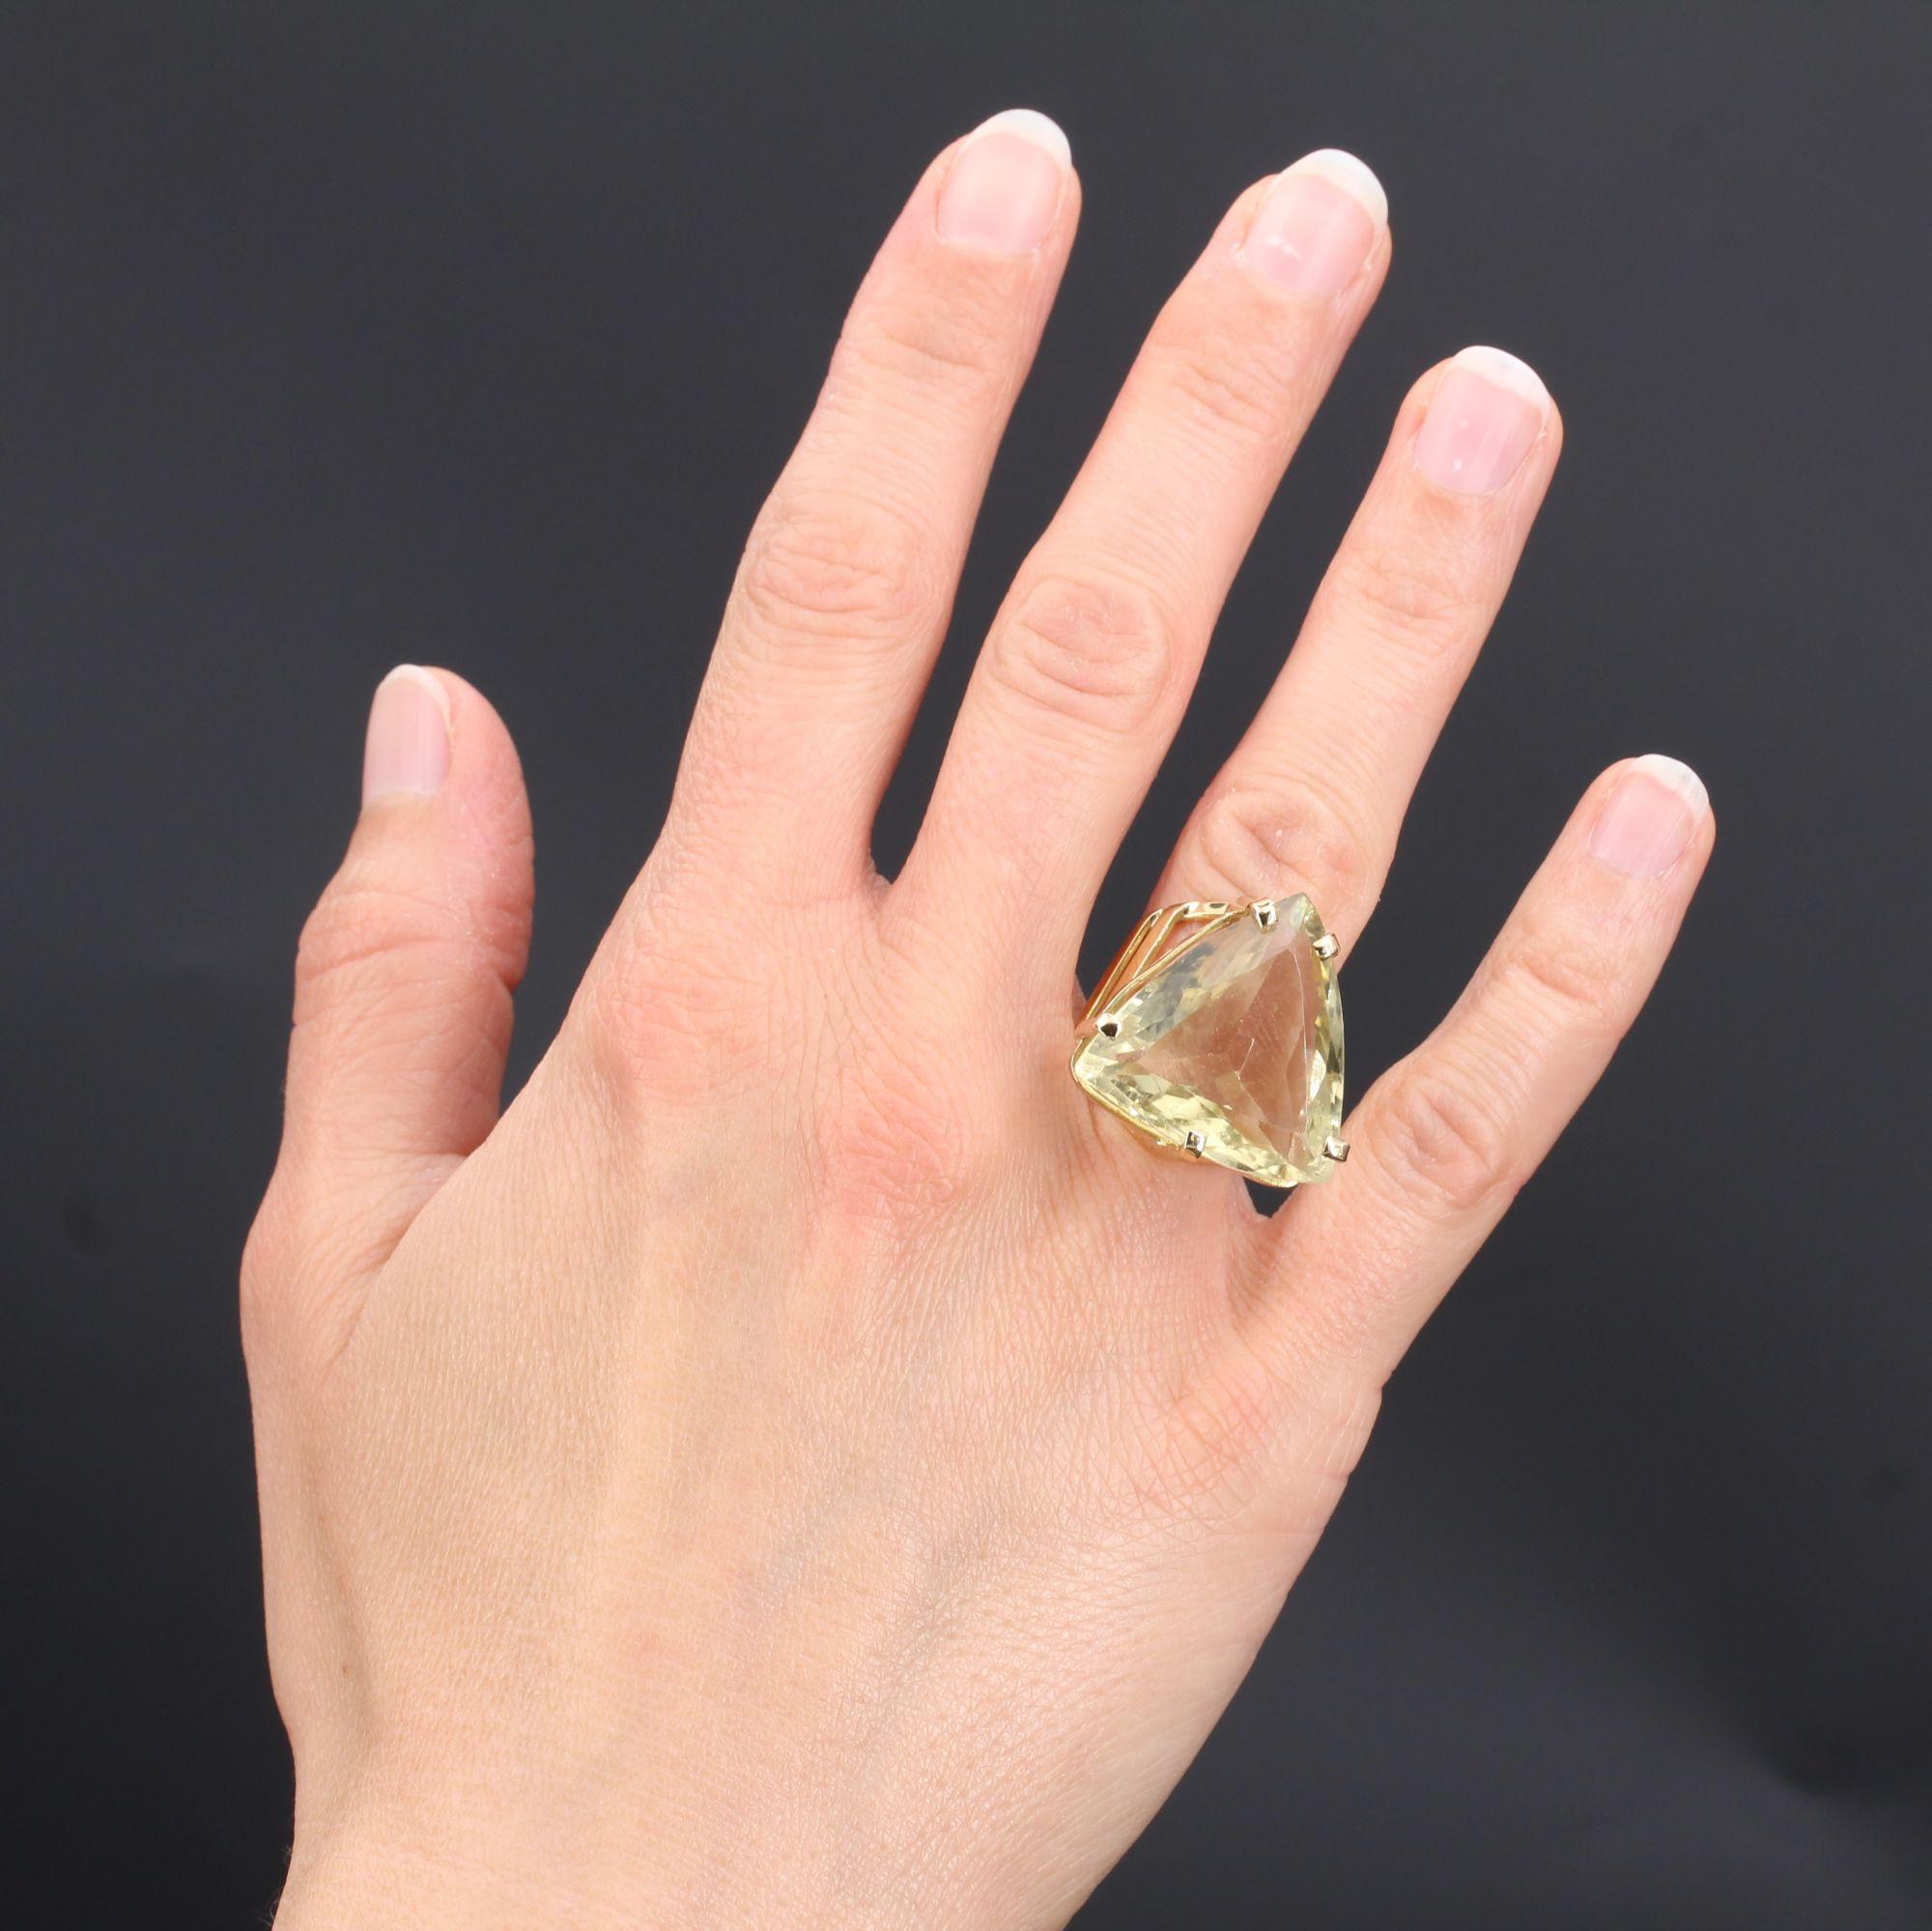 Ring in 18 karat yellow gold.
Surprising retro ring, it is decorated on its top with a lemon quartz of triangular form set with 5 claws. The setting, heightened and openwork, is made of flat threads.
Weight of the quartz : 23 carats